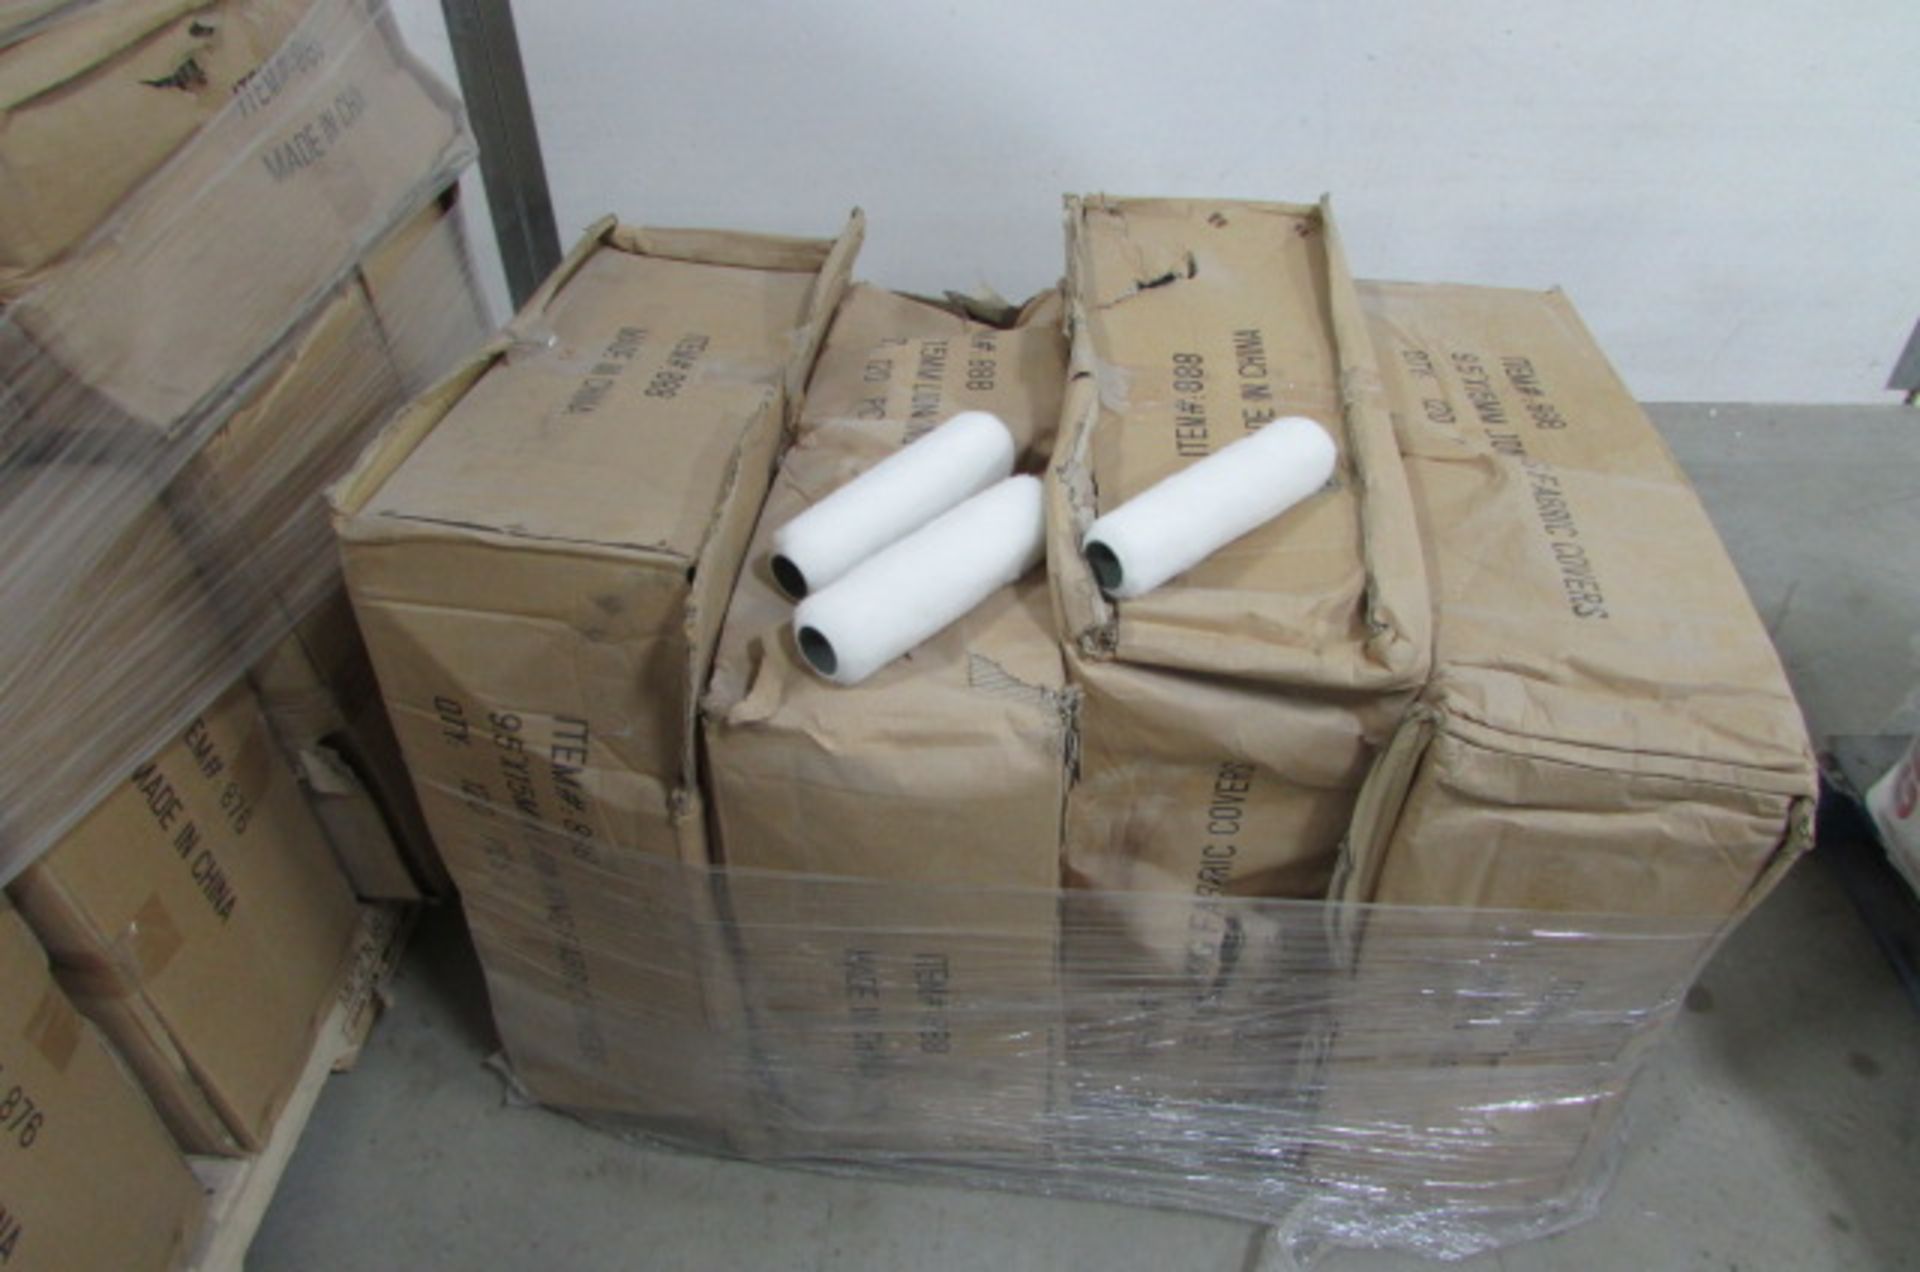 LOT: BOX OF PAINT ROLLERS (120 ROLLERS PER BOX)